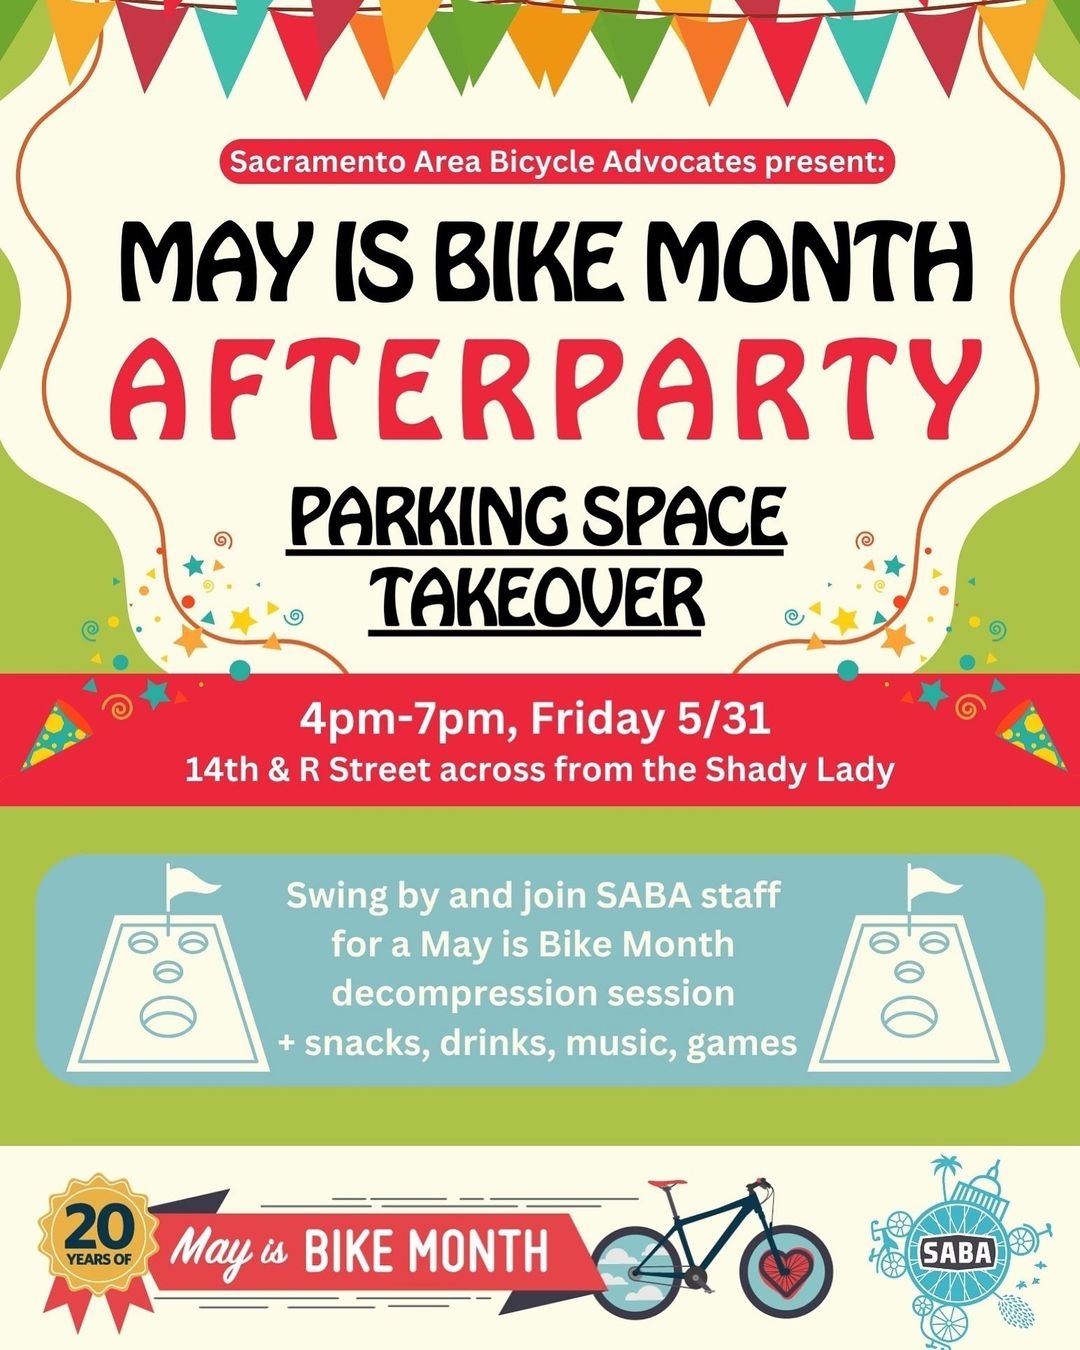 Parking Space Takeover for End of May is Bike Month!